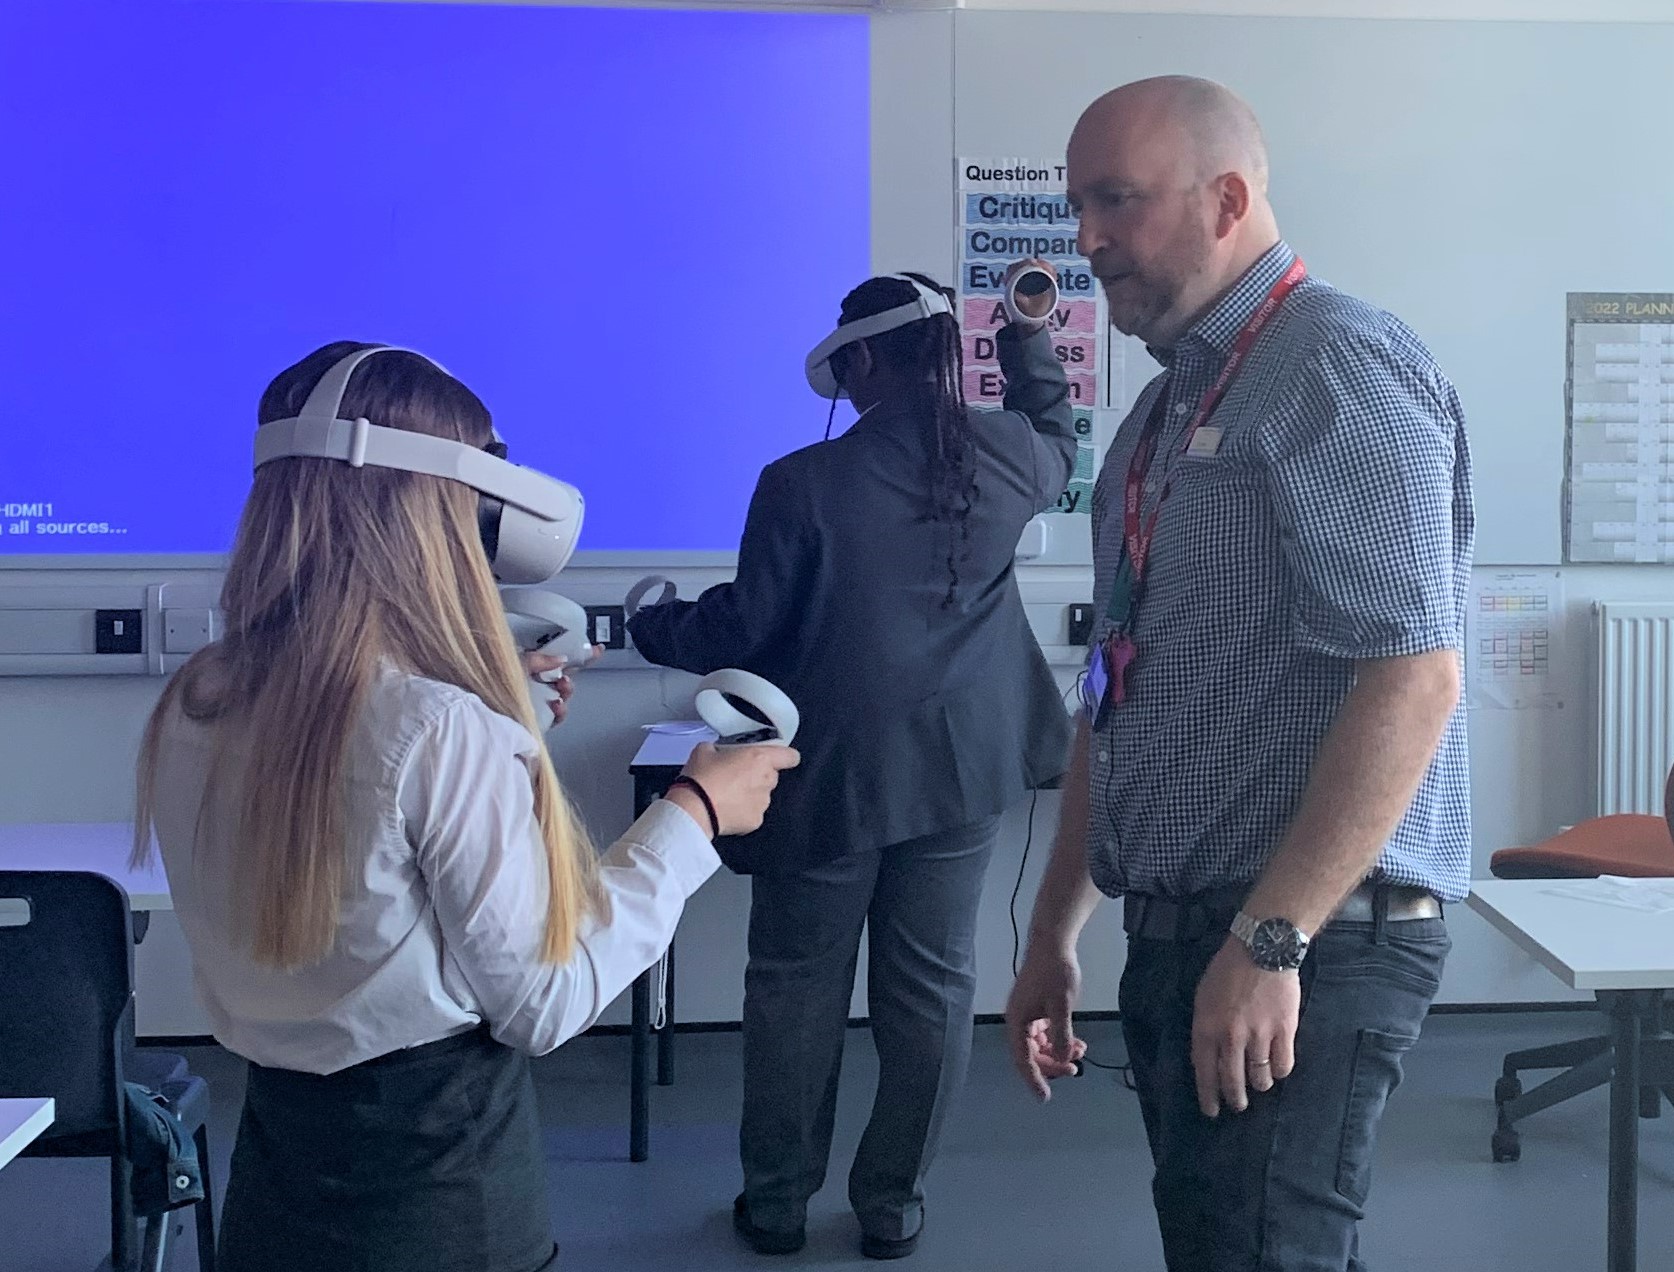 A female student at a University Technical College (UTC) using Virtual Reality (VR) headset with colleague from Sheffield Children's Hospital. In the background there is another student also wearing a VR headset.